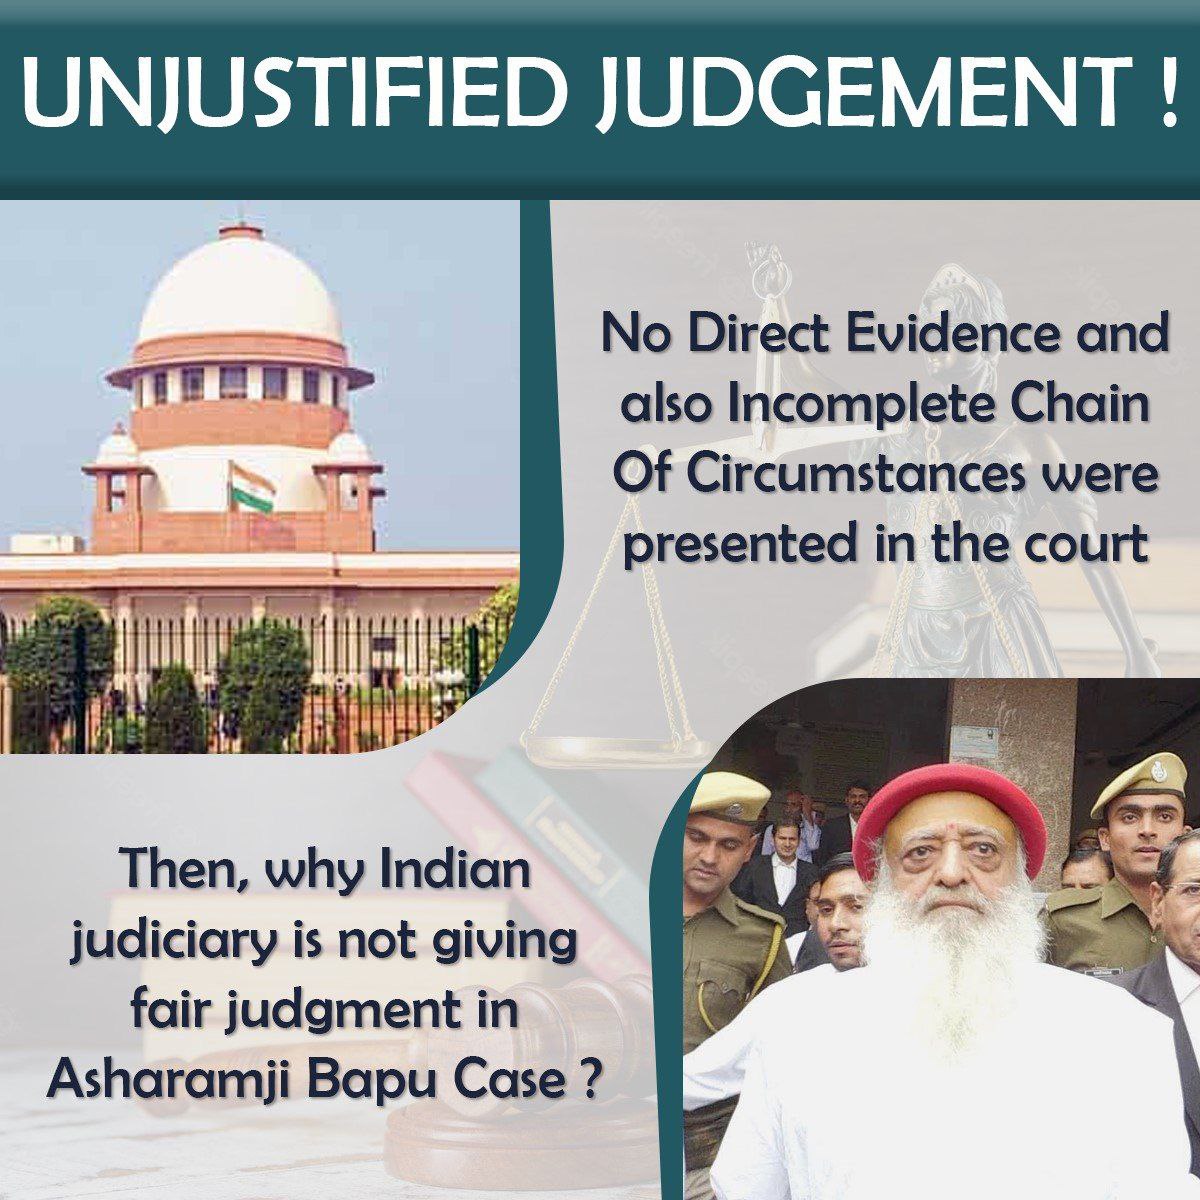 In Asharamji Bapu Case , everyone has understood that #FakeAllegations have been leveled against him, the court has been giving punishment for the last many years, denying the Hidden Aspects in this case. But now innocent Bapuji should get justice soon.✊ Seek Justice